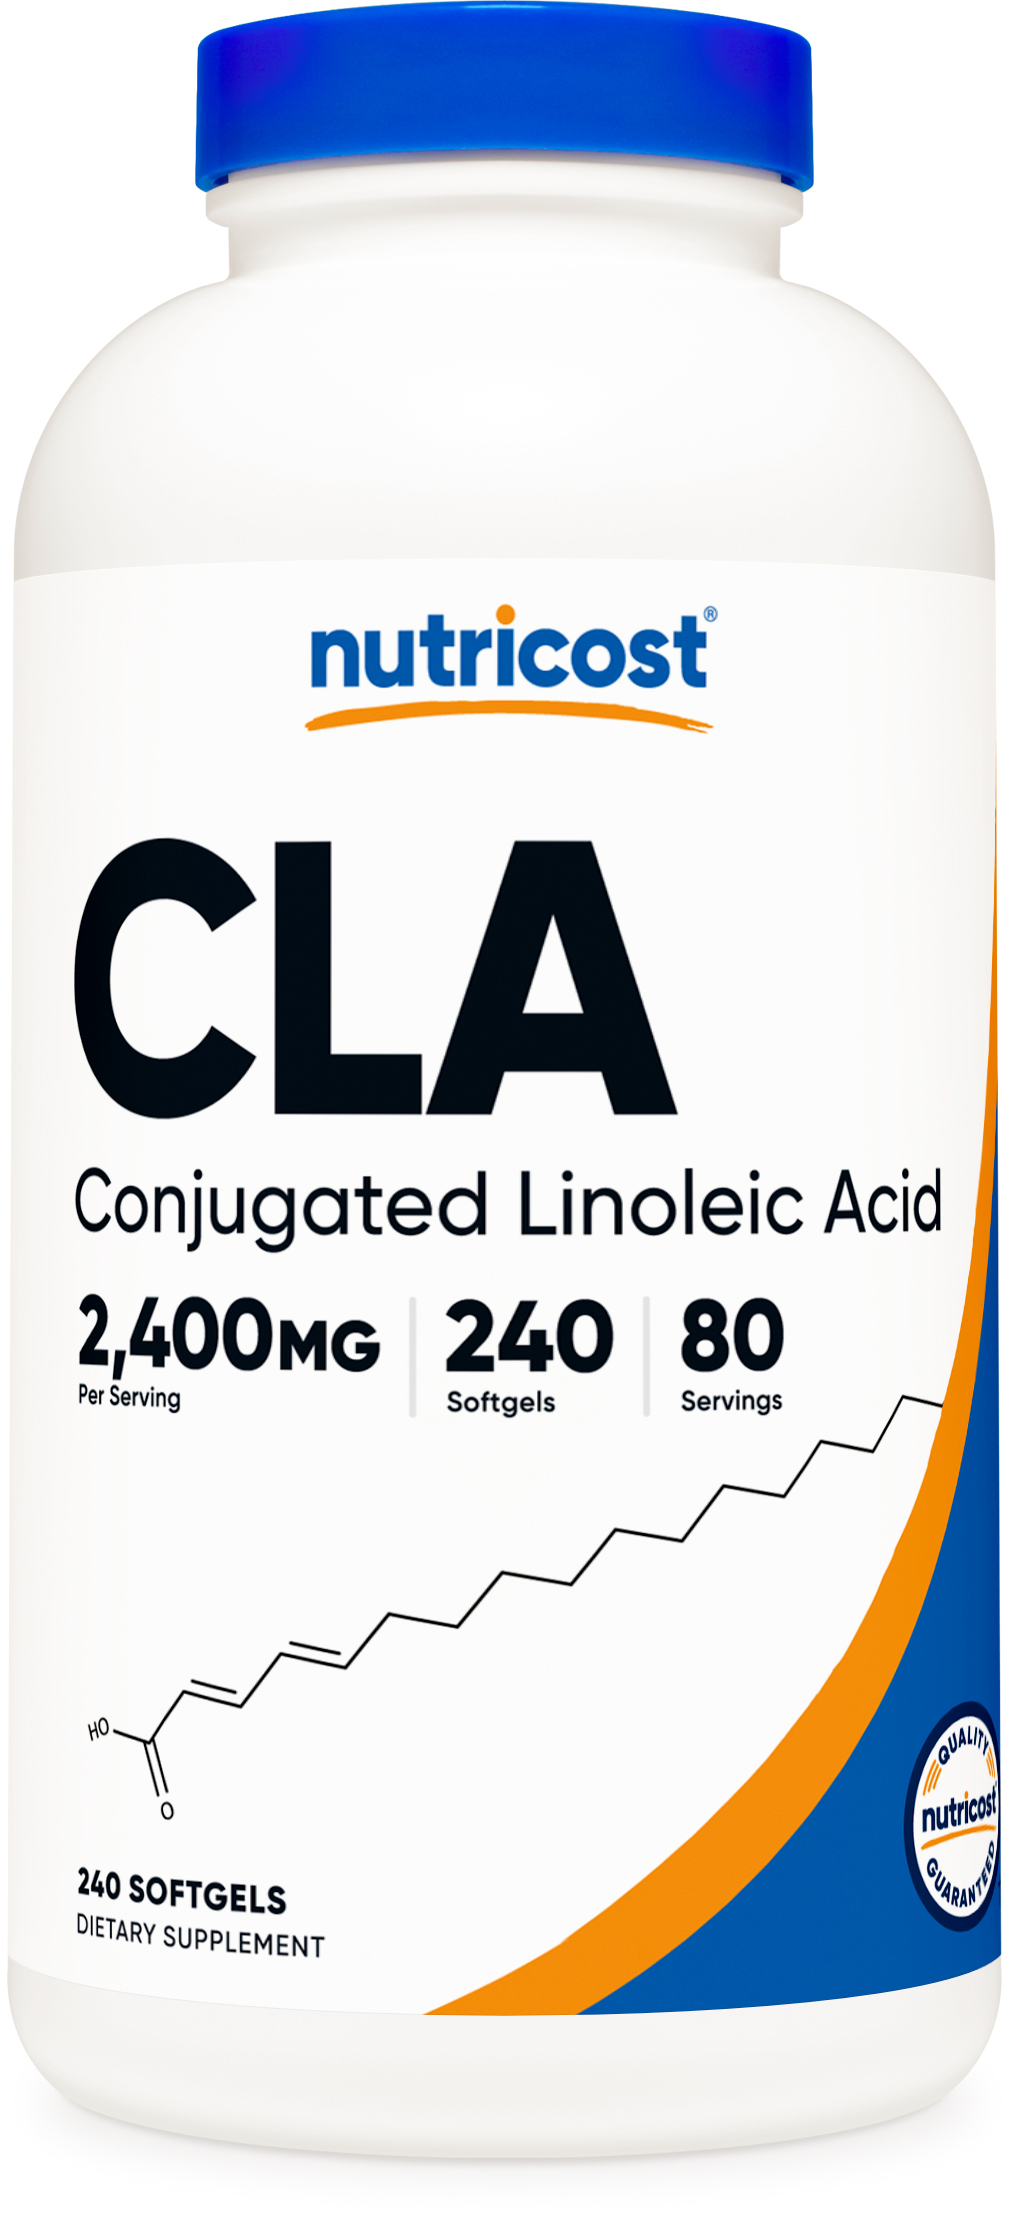 Nutricost CLA (Conjugated Linoleic Acid) Supplement 800mg, 240 Soft Gels - image 1 of 5